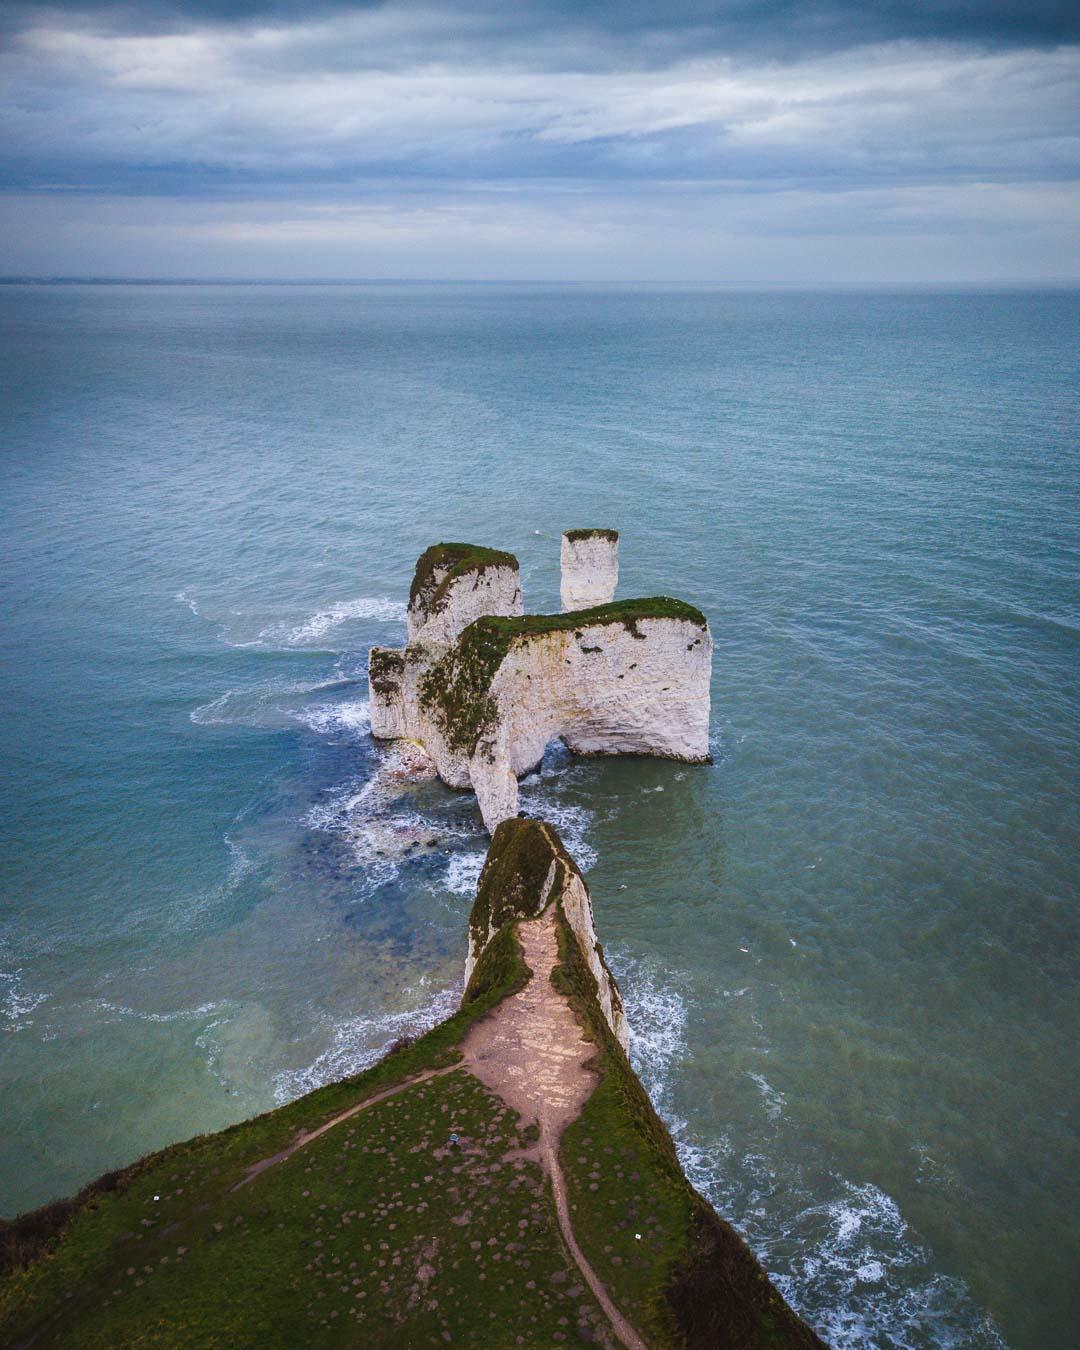 the sea stacks at old harry rocks